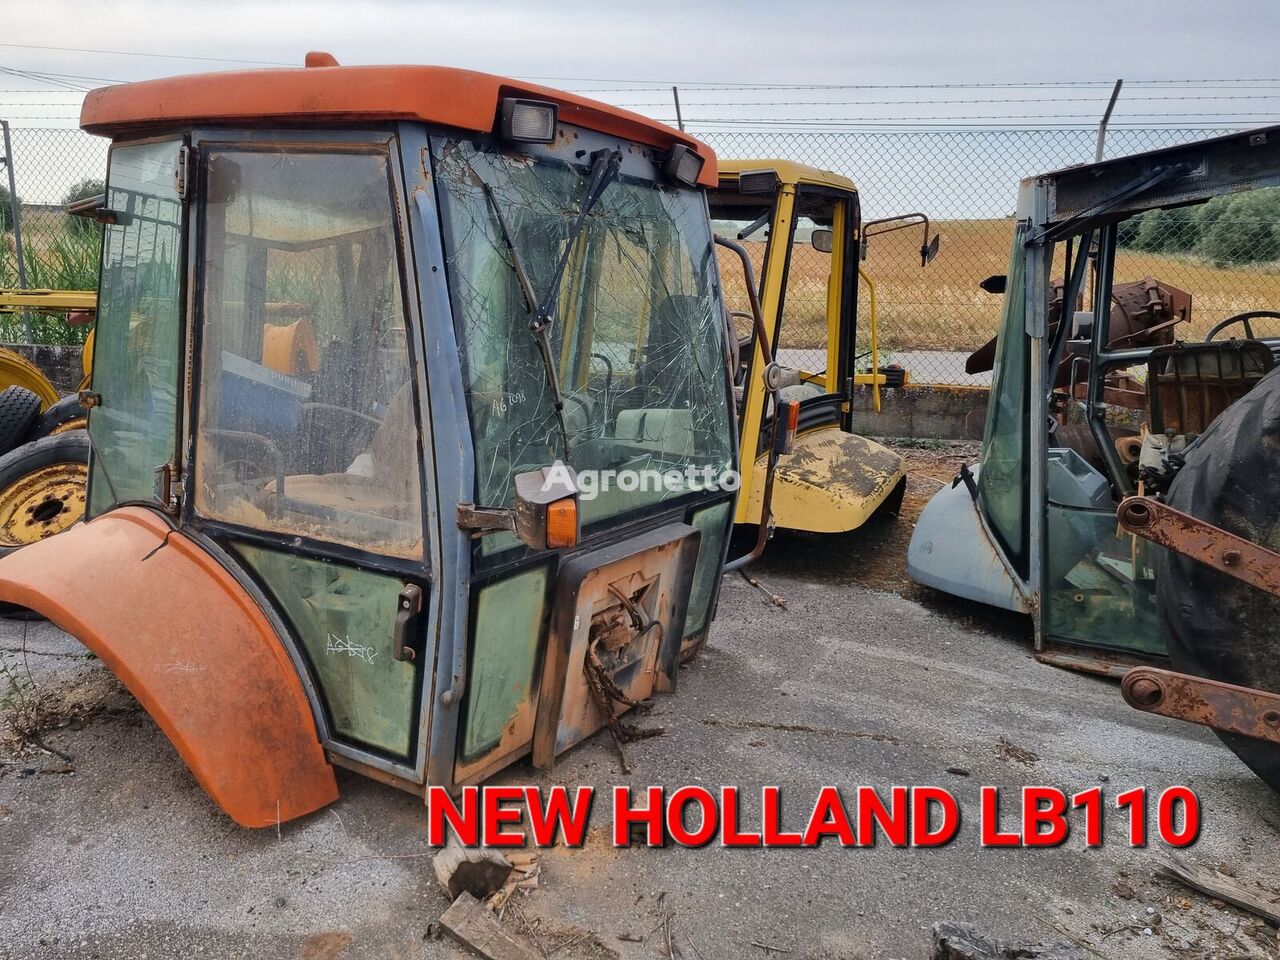 New Holland LB110 cabin for crawler tractor for parts